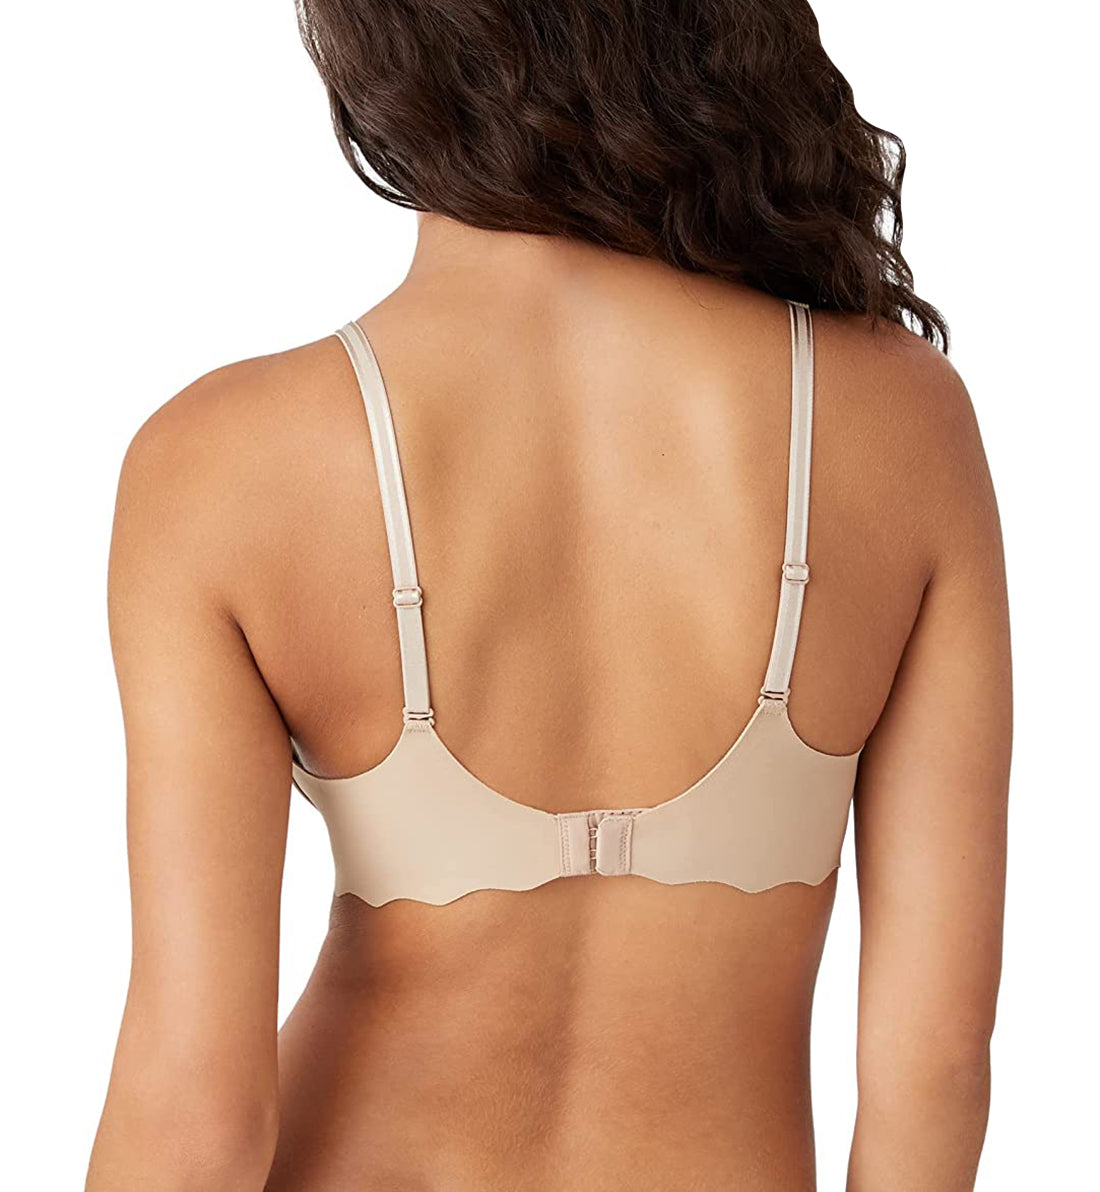 B.tempt'd B. WOW'D Wire Free Plunge Padded Bra (952287),Small,Au Natural - Au Natural,Small